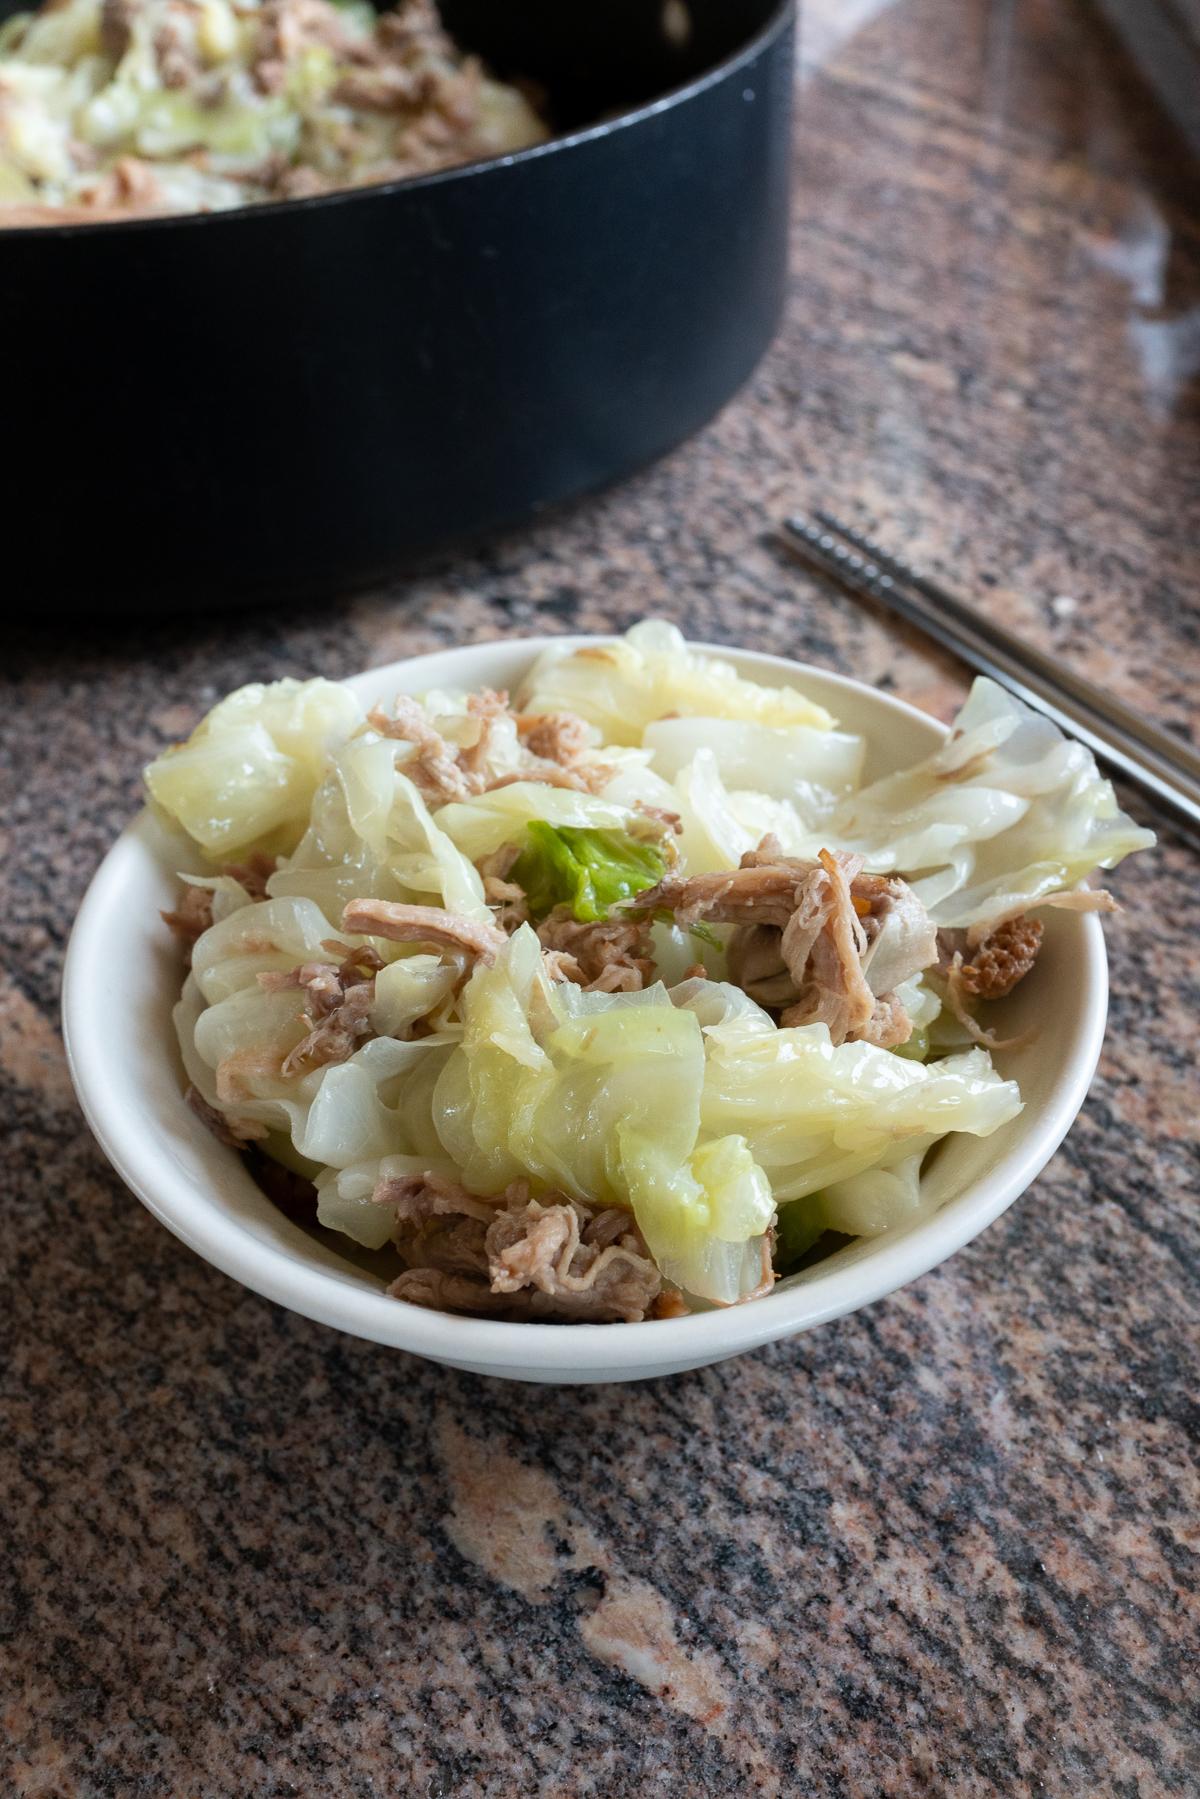 Kalua pork and cabbage in a bowl